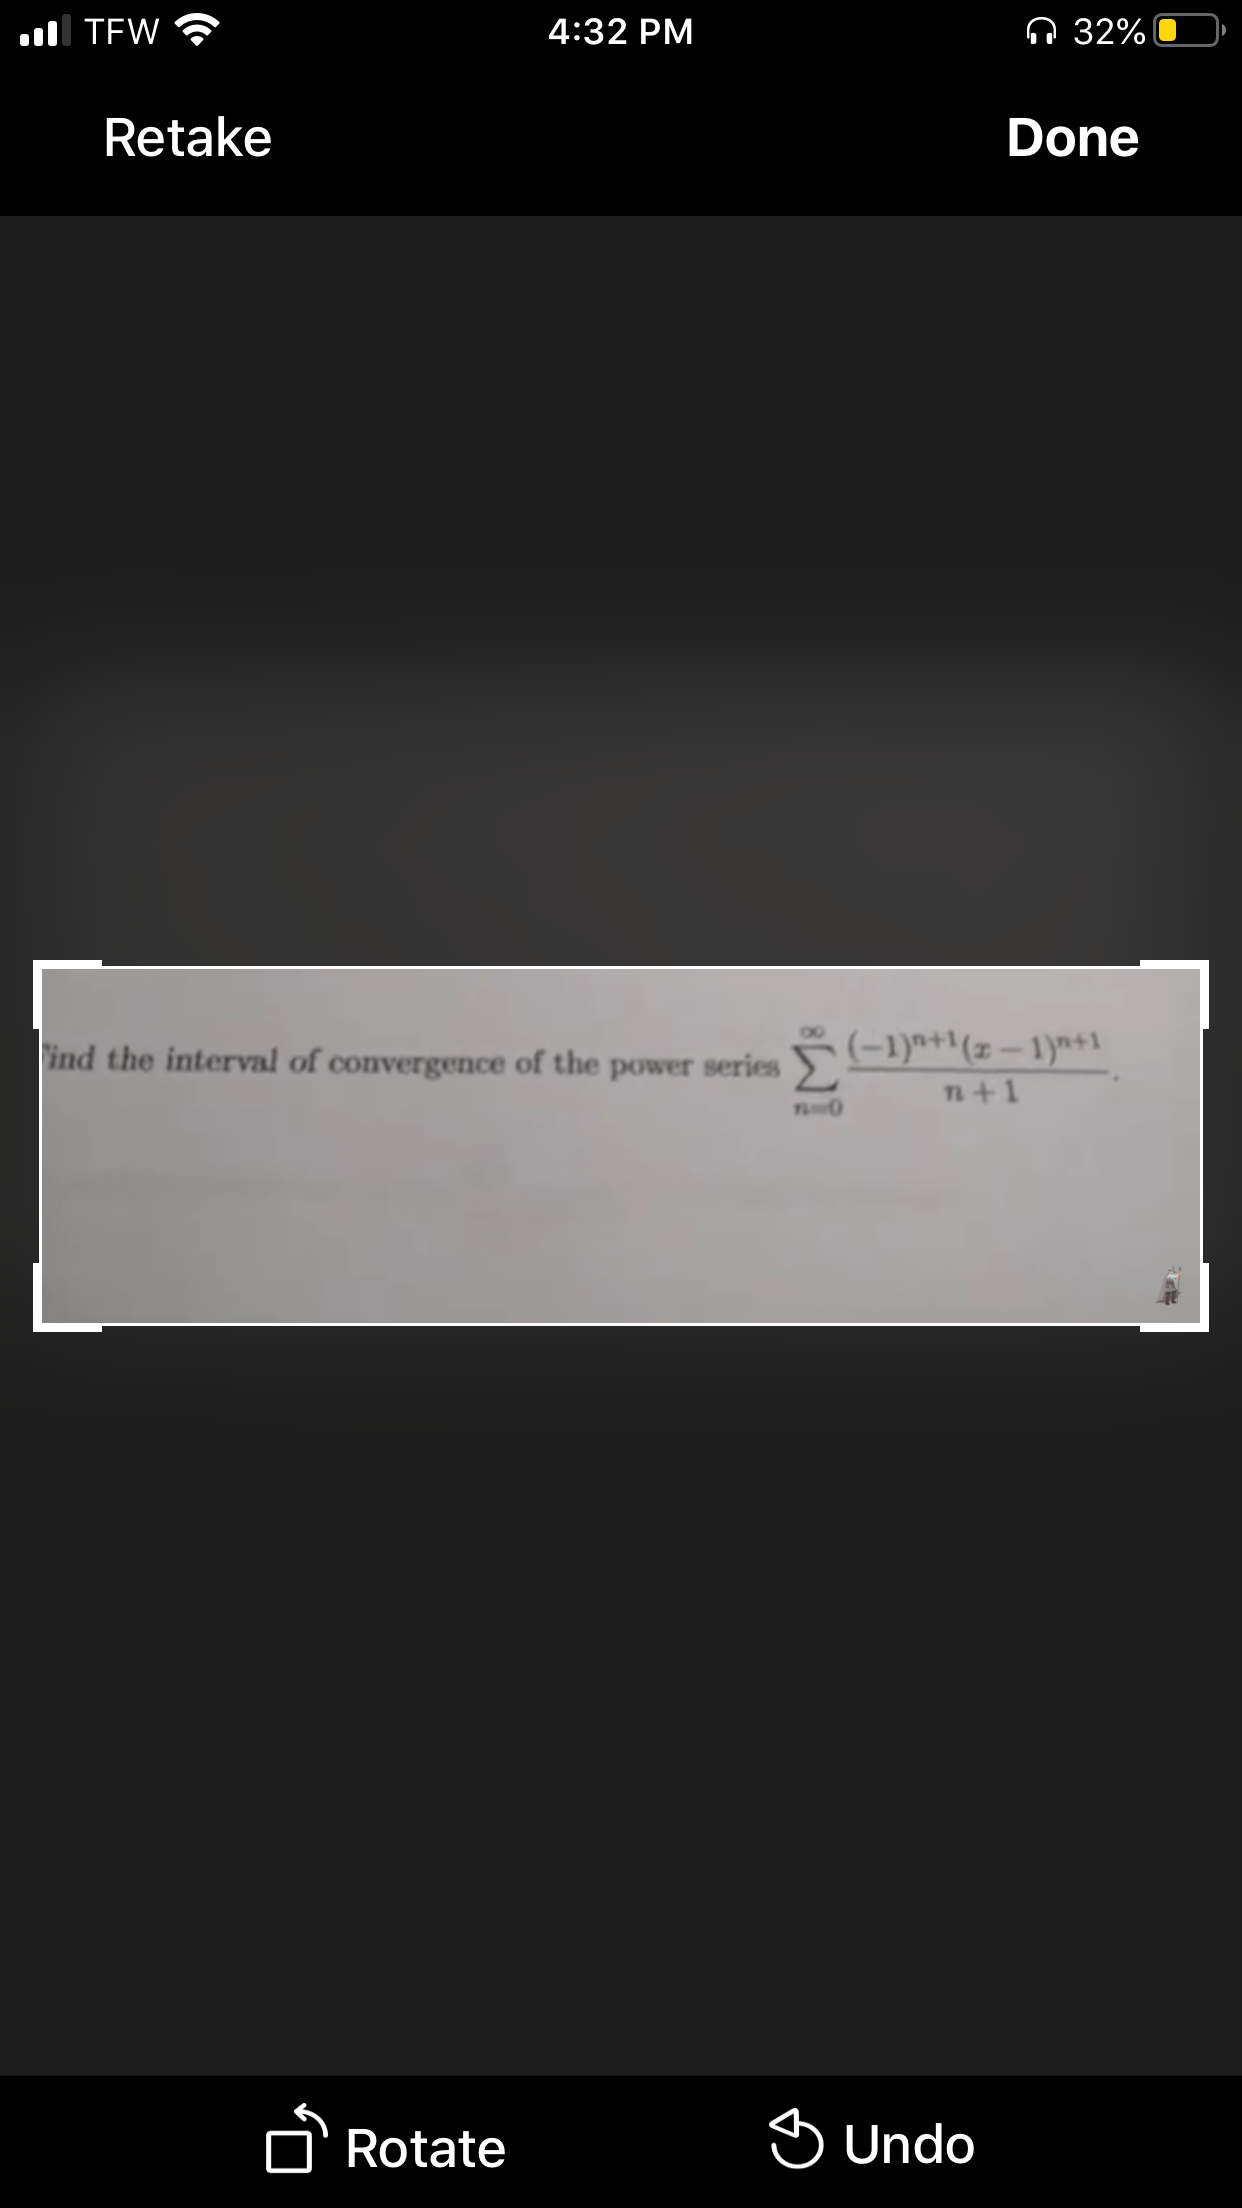 ind the interval of convergence of the
power
series
n+1
